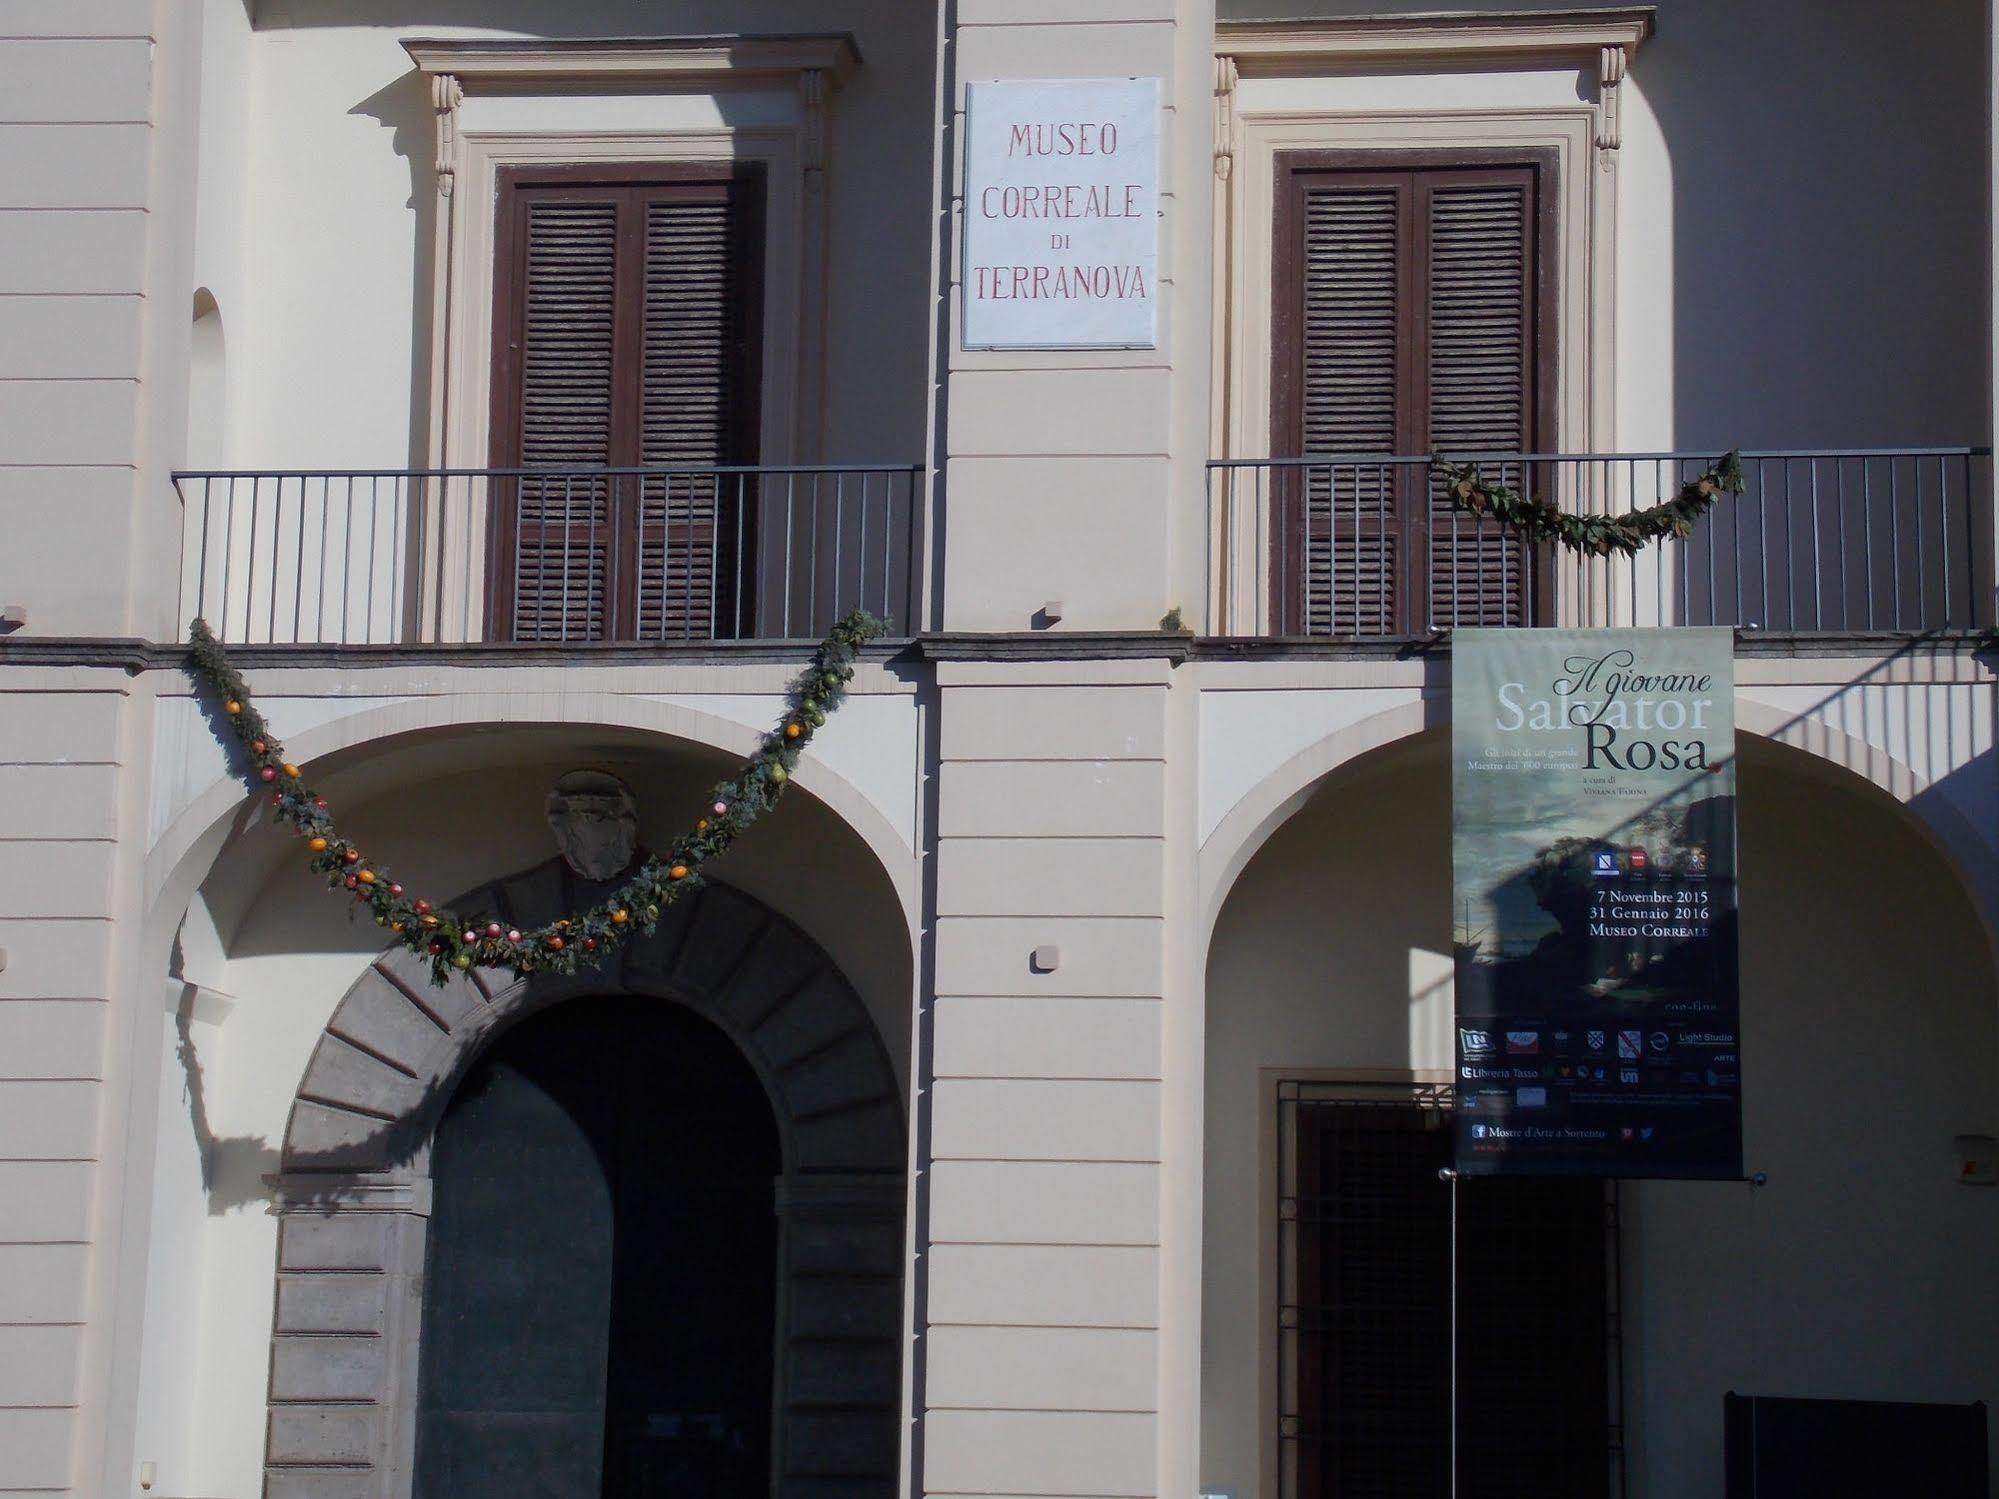 Sorrento Relais Bed and Breakfast Exterior foto